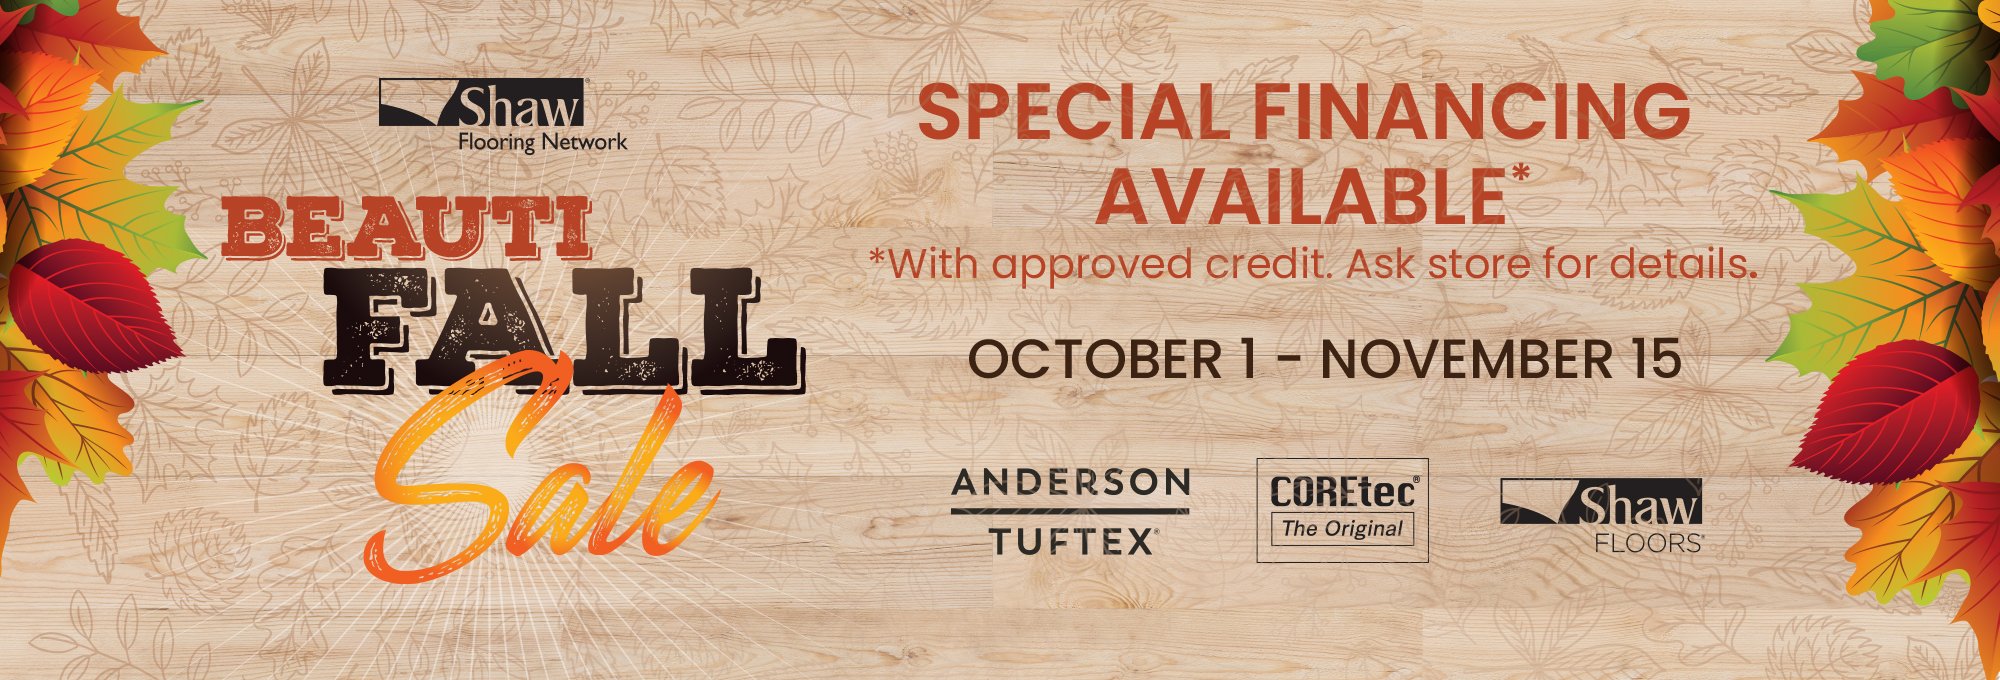 Beauti-Fall Sale - Special Financing Available with Approved Credit.